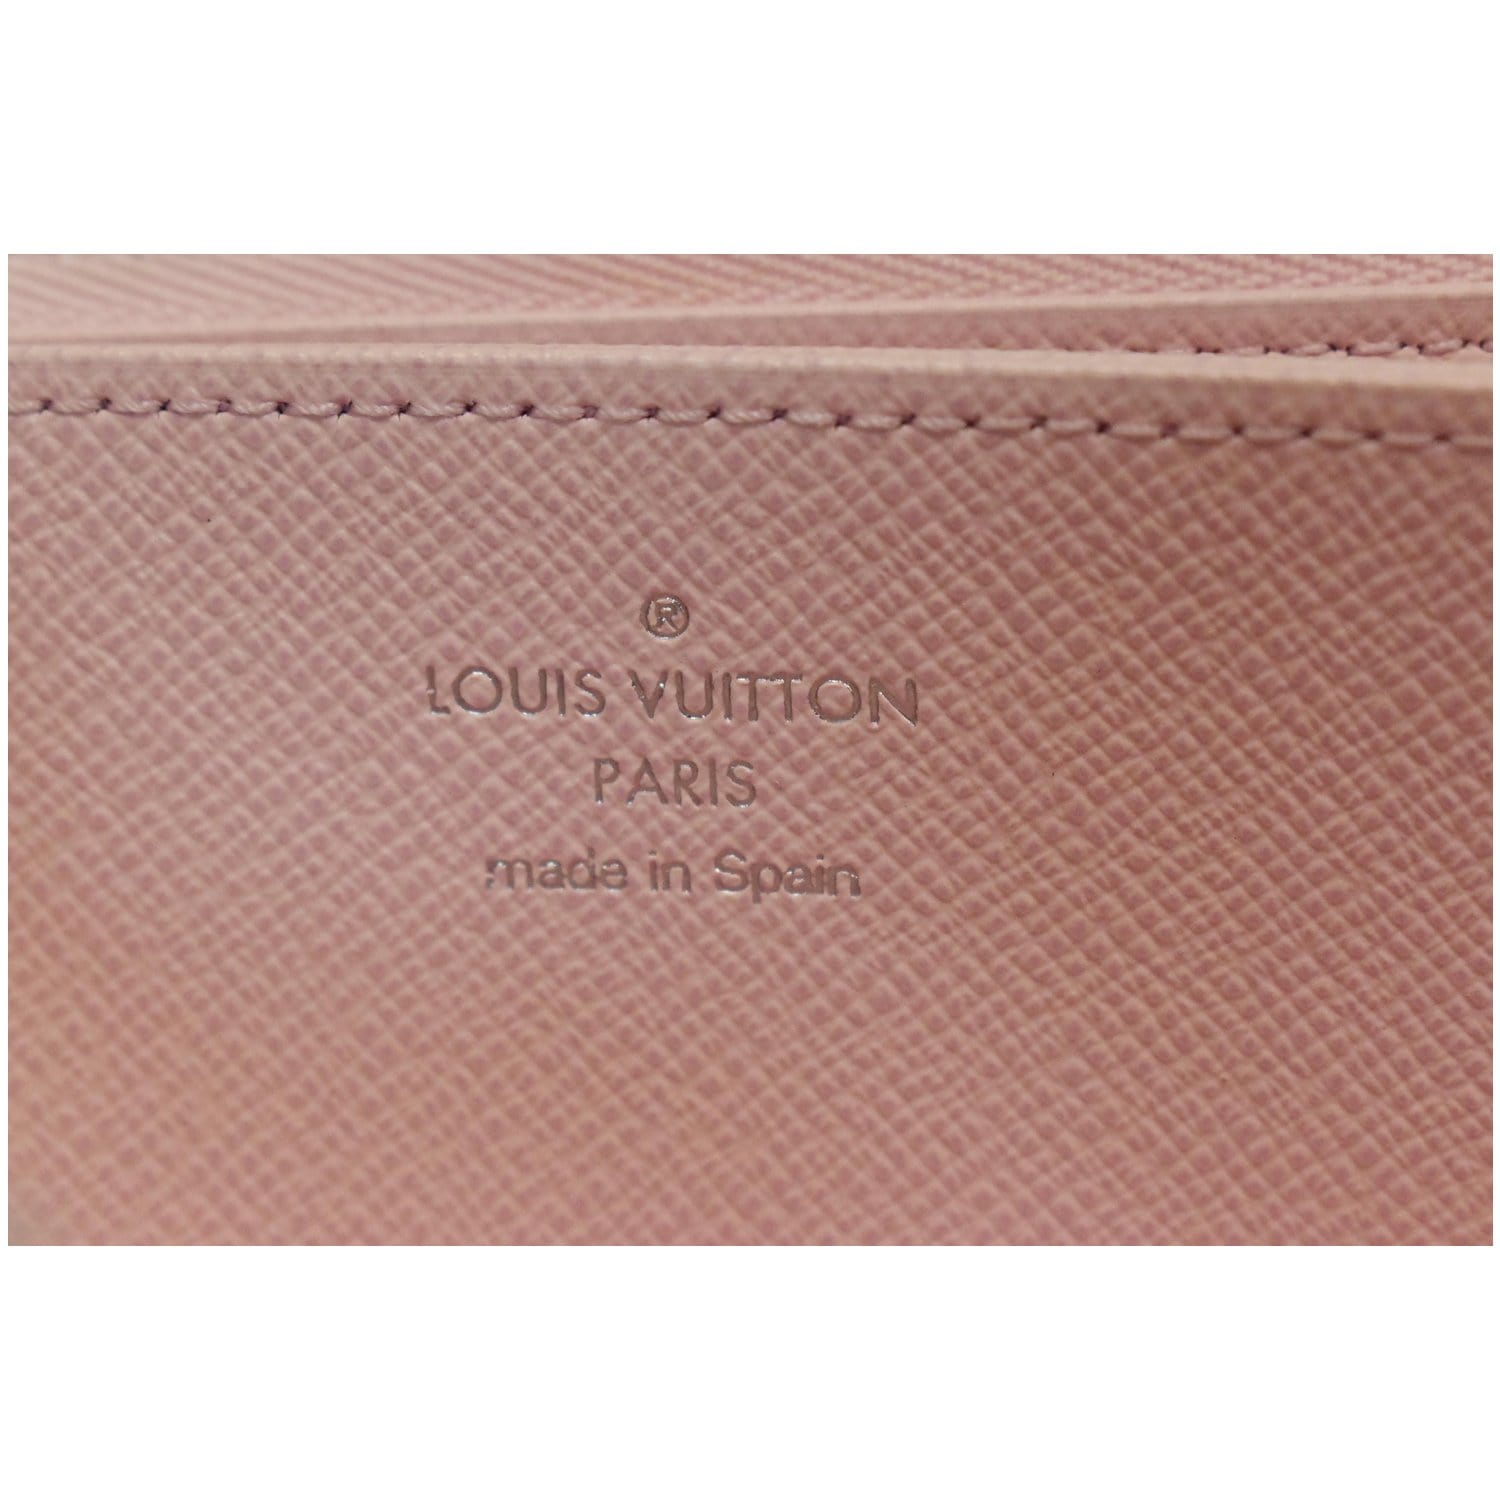 Louis Vuitton Zippy Wallet Monogram Brown in Coated Canvas/Leather